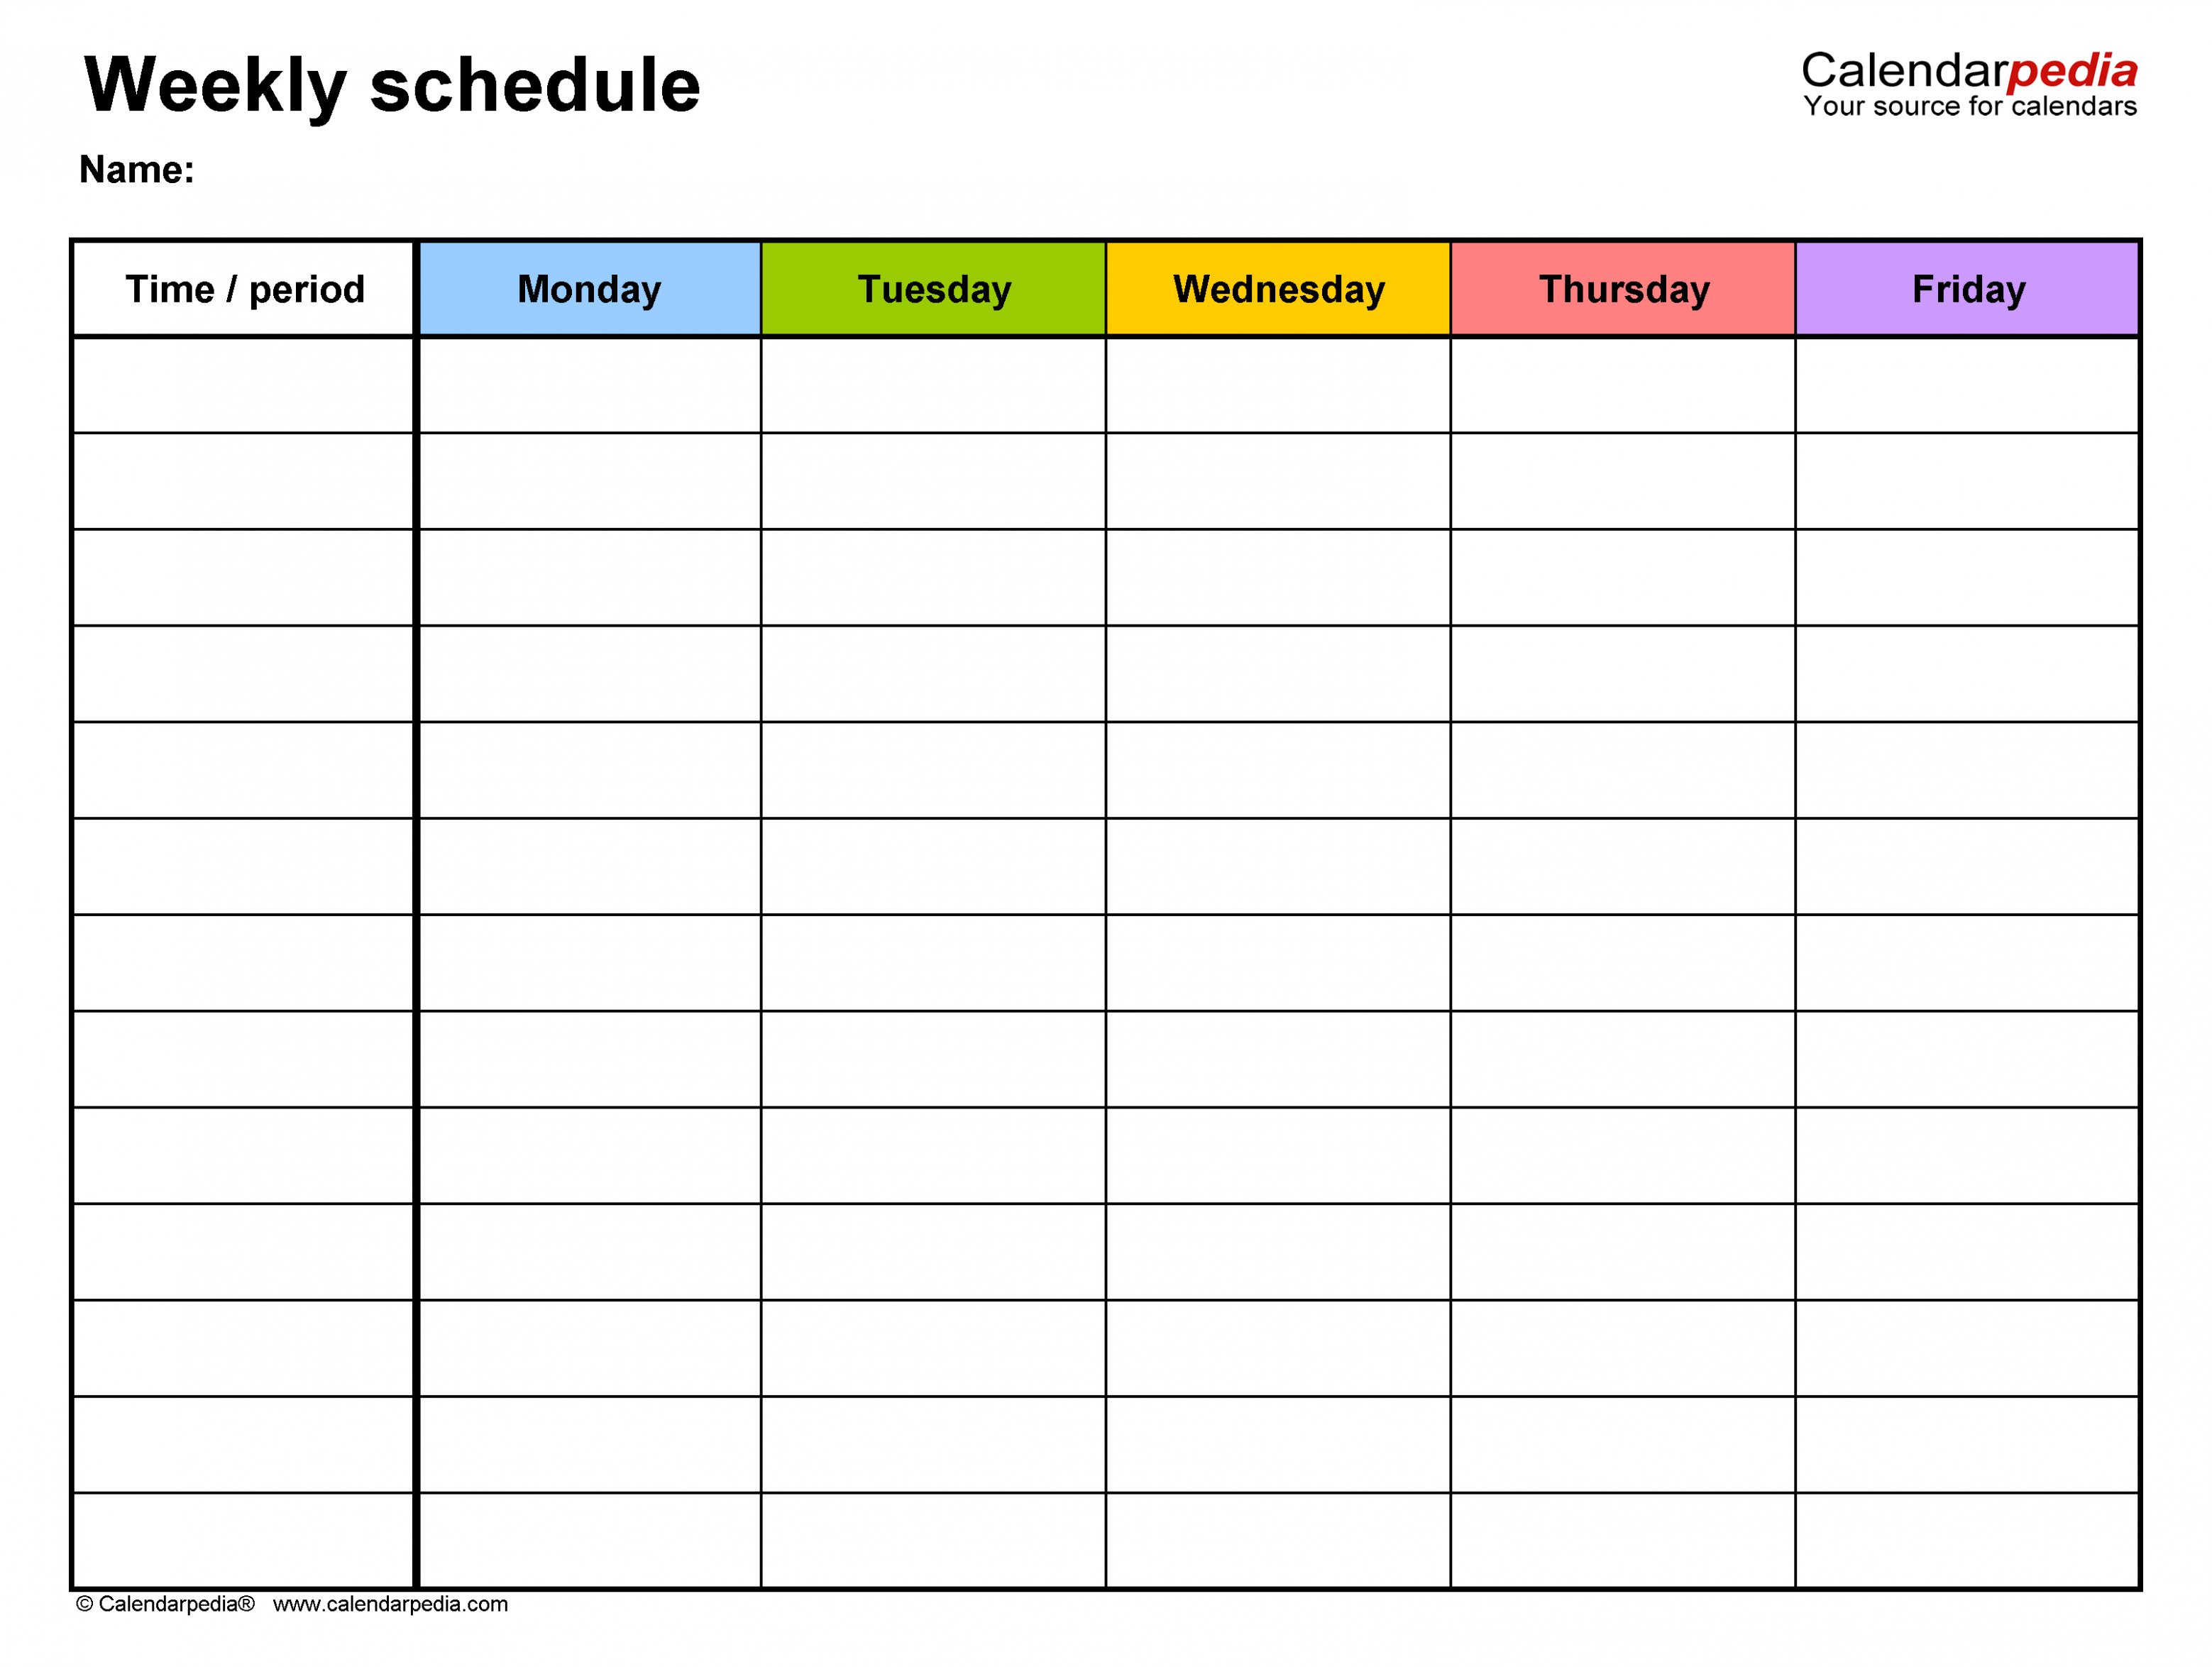  Monday To Sunday Schedule Template Word